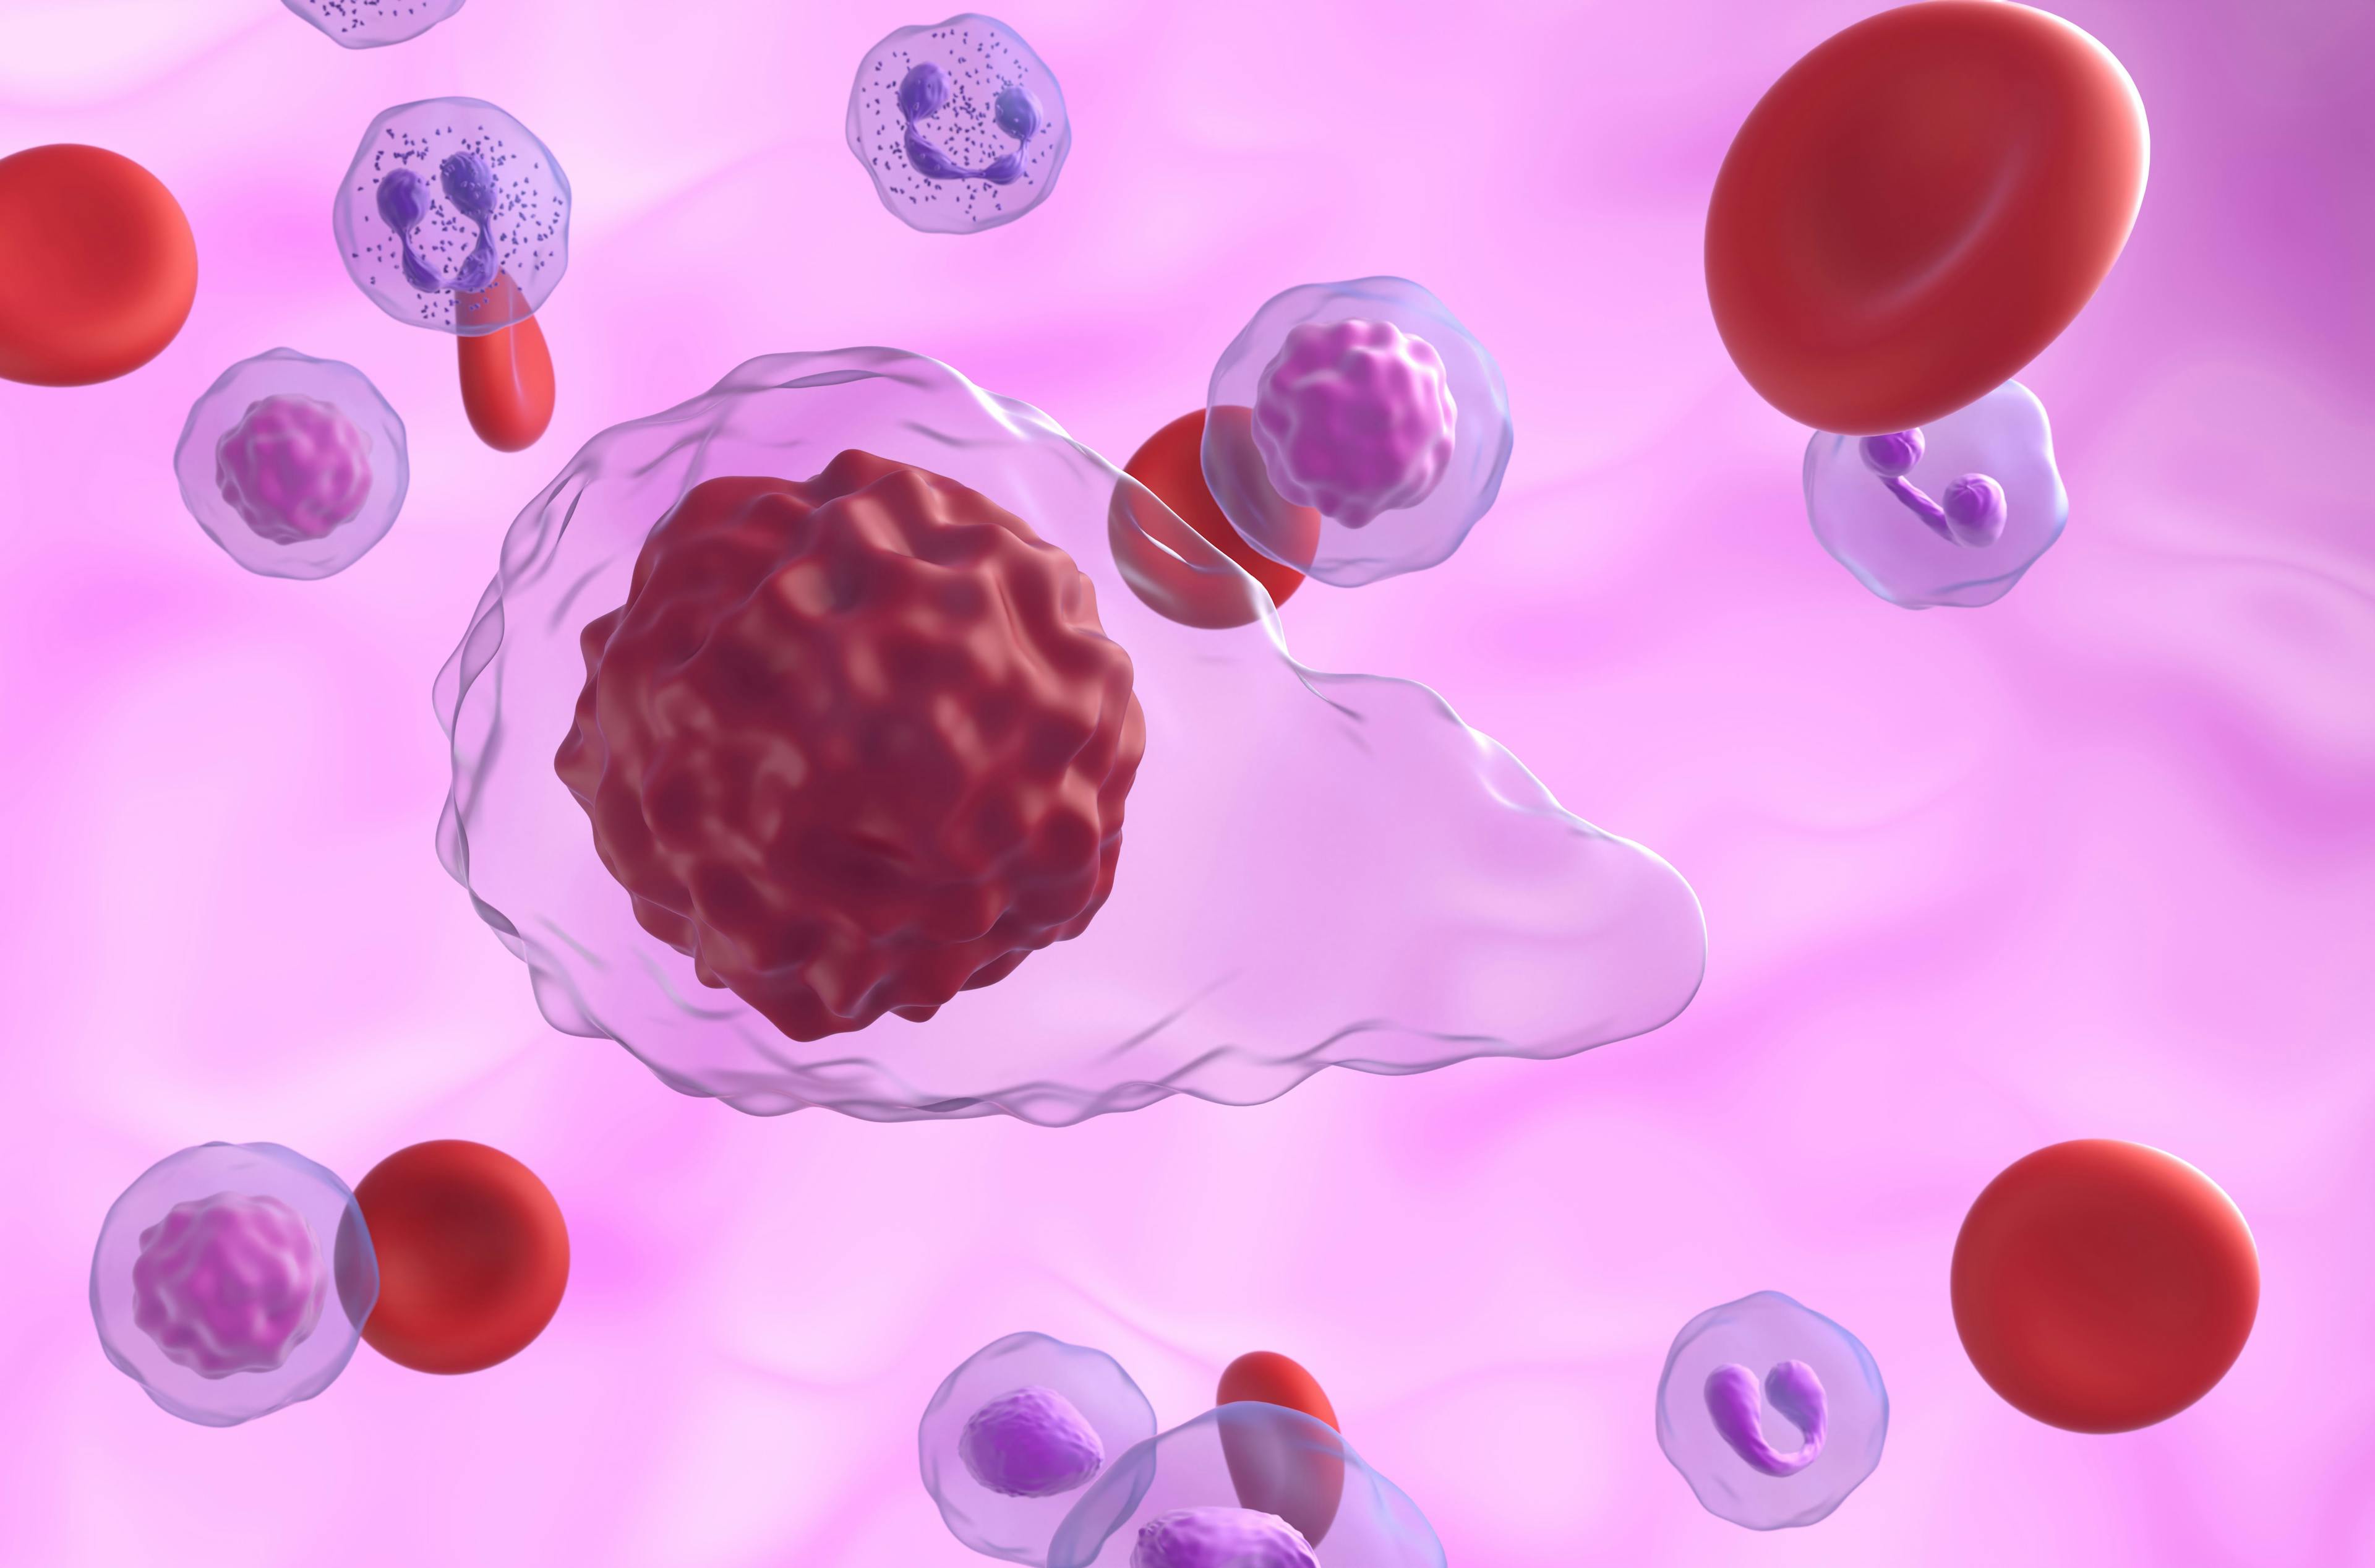 Closeup 3D illustration of primary myelofibrosis (PMF) cells in blood flow: © LASZLO - stock.adobe.com